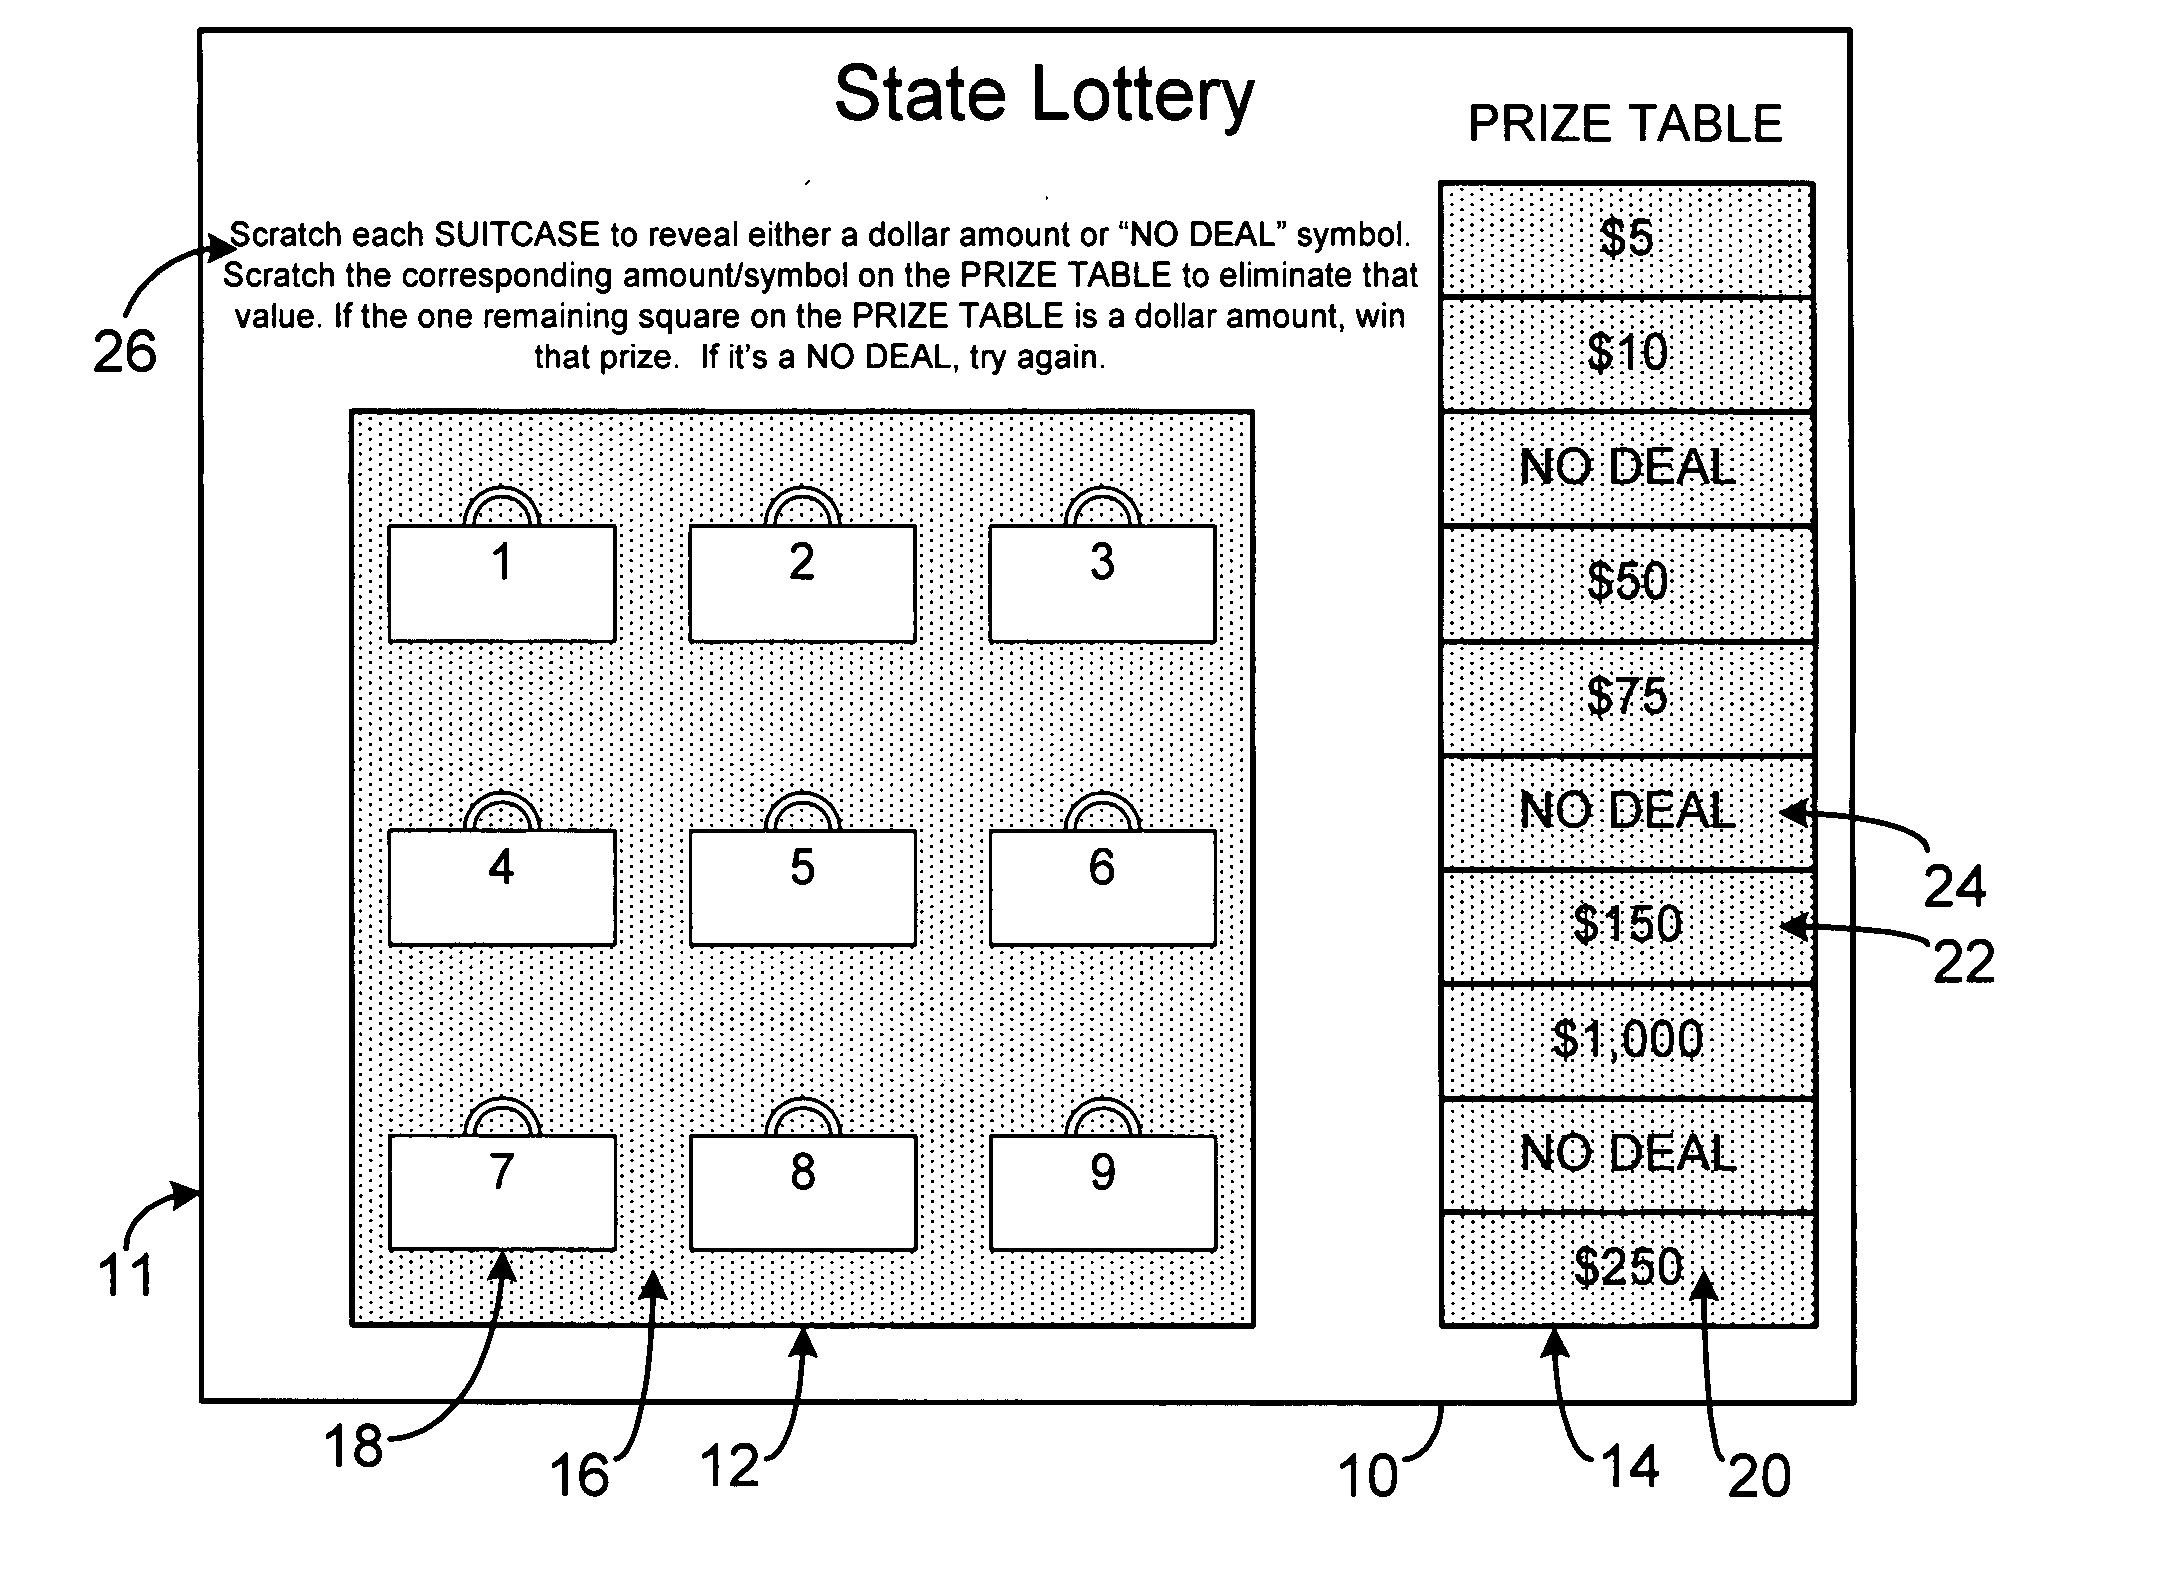 Lottery instant-game ticket